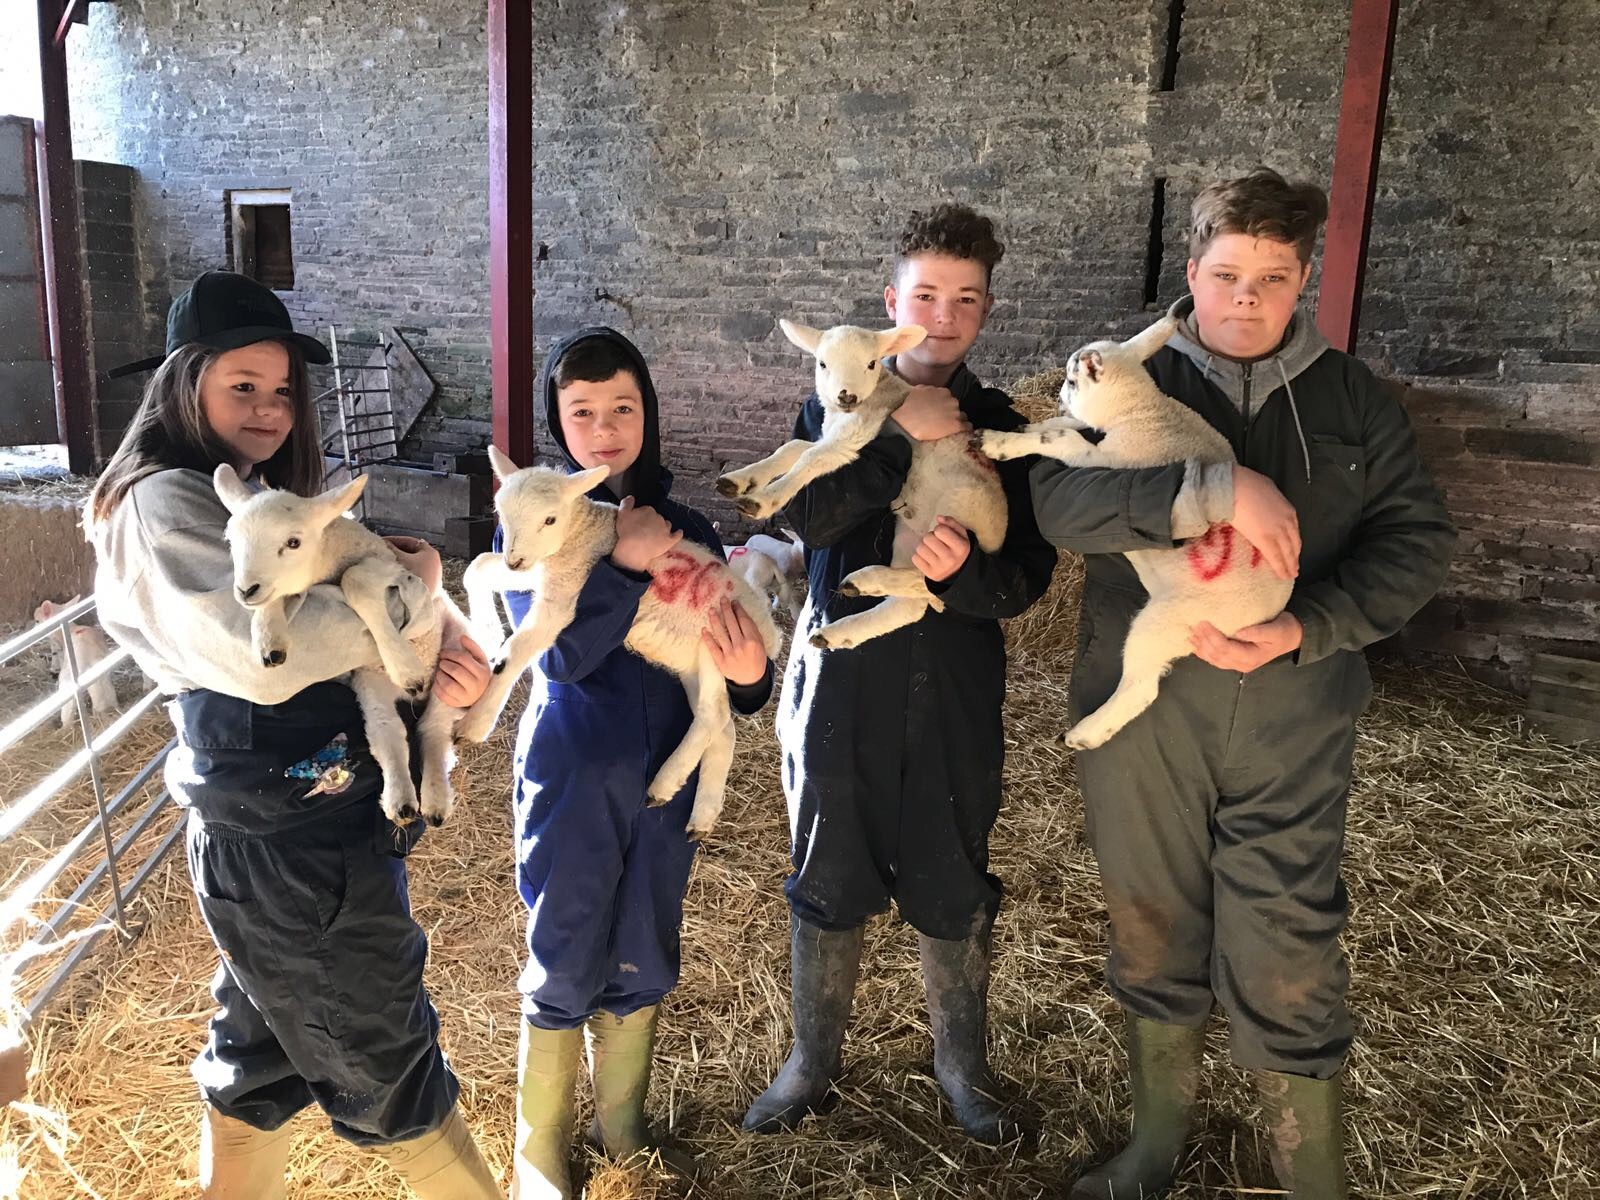 Four young people dressed in overalls and wellies hold a lamb each